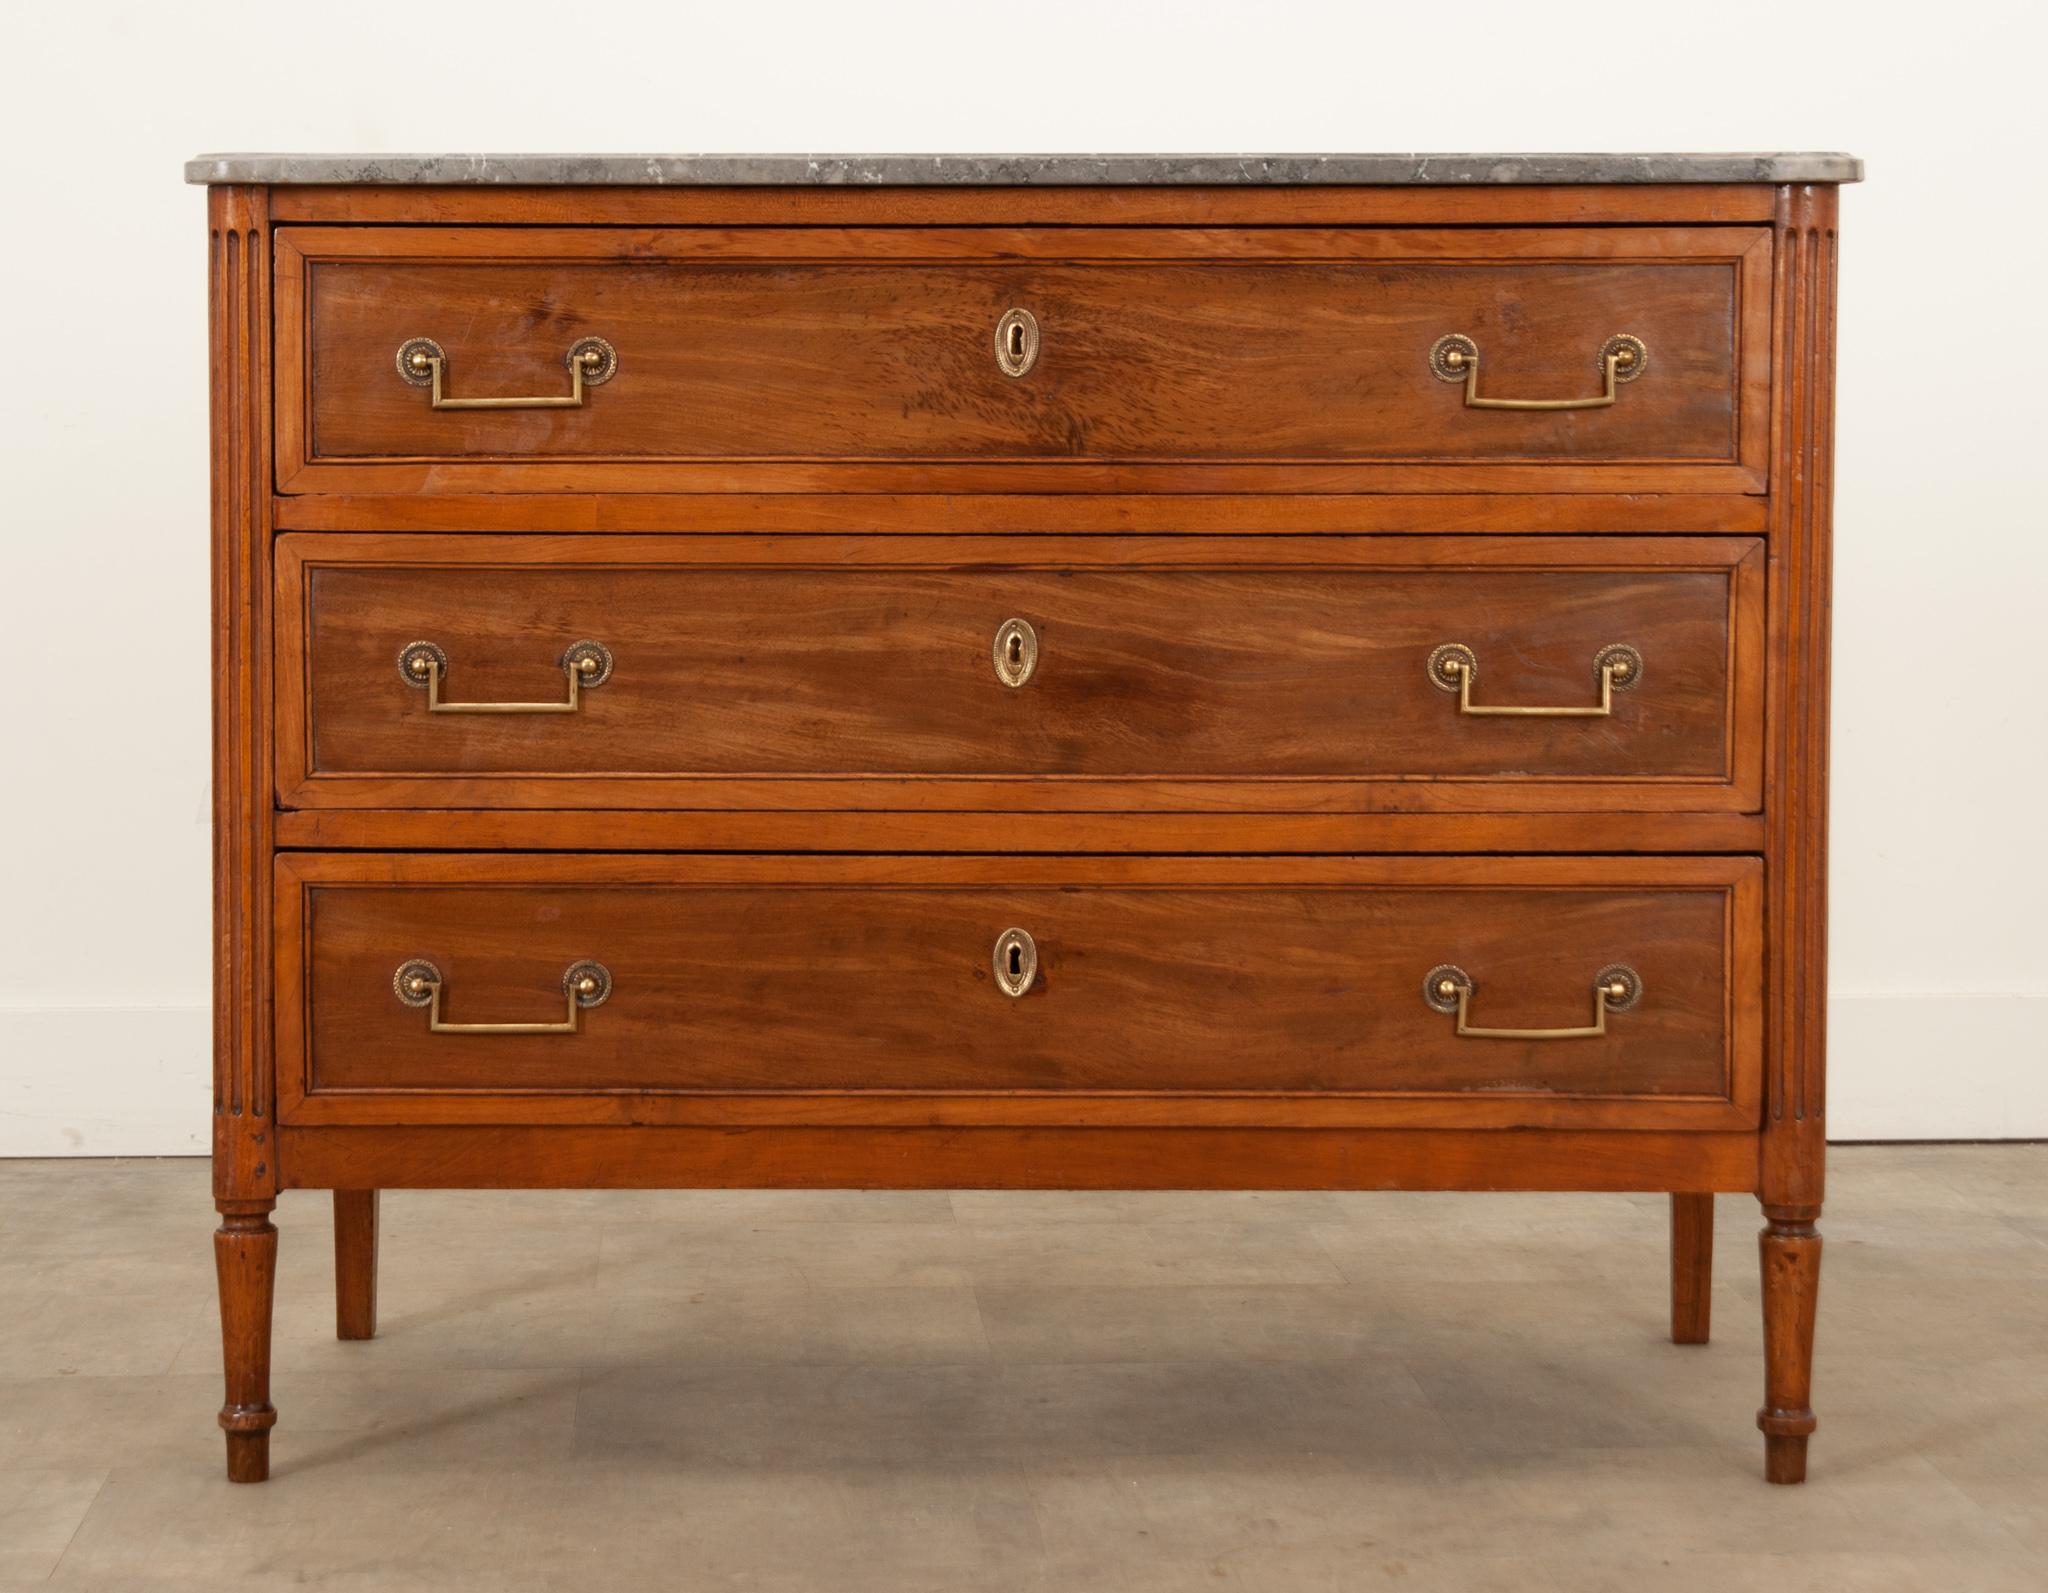 An early 19th Century Louis XVI style commode hand-crafted in France circa 1800. This stylish case piece is made of mahogany and topped with its original shaped marble top that has incredibly gorgeous patterns and charcoal and black veining